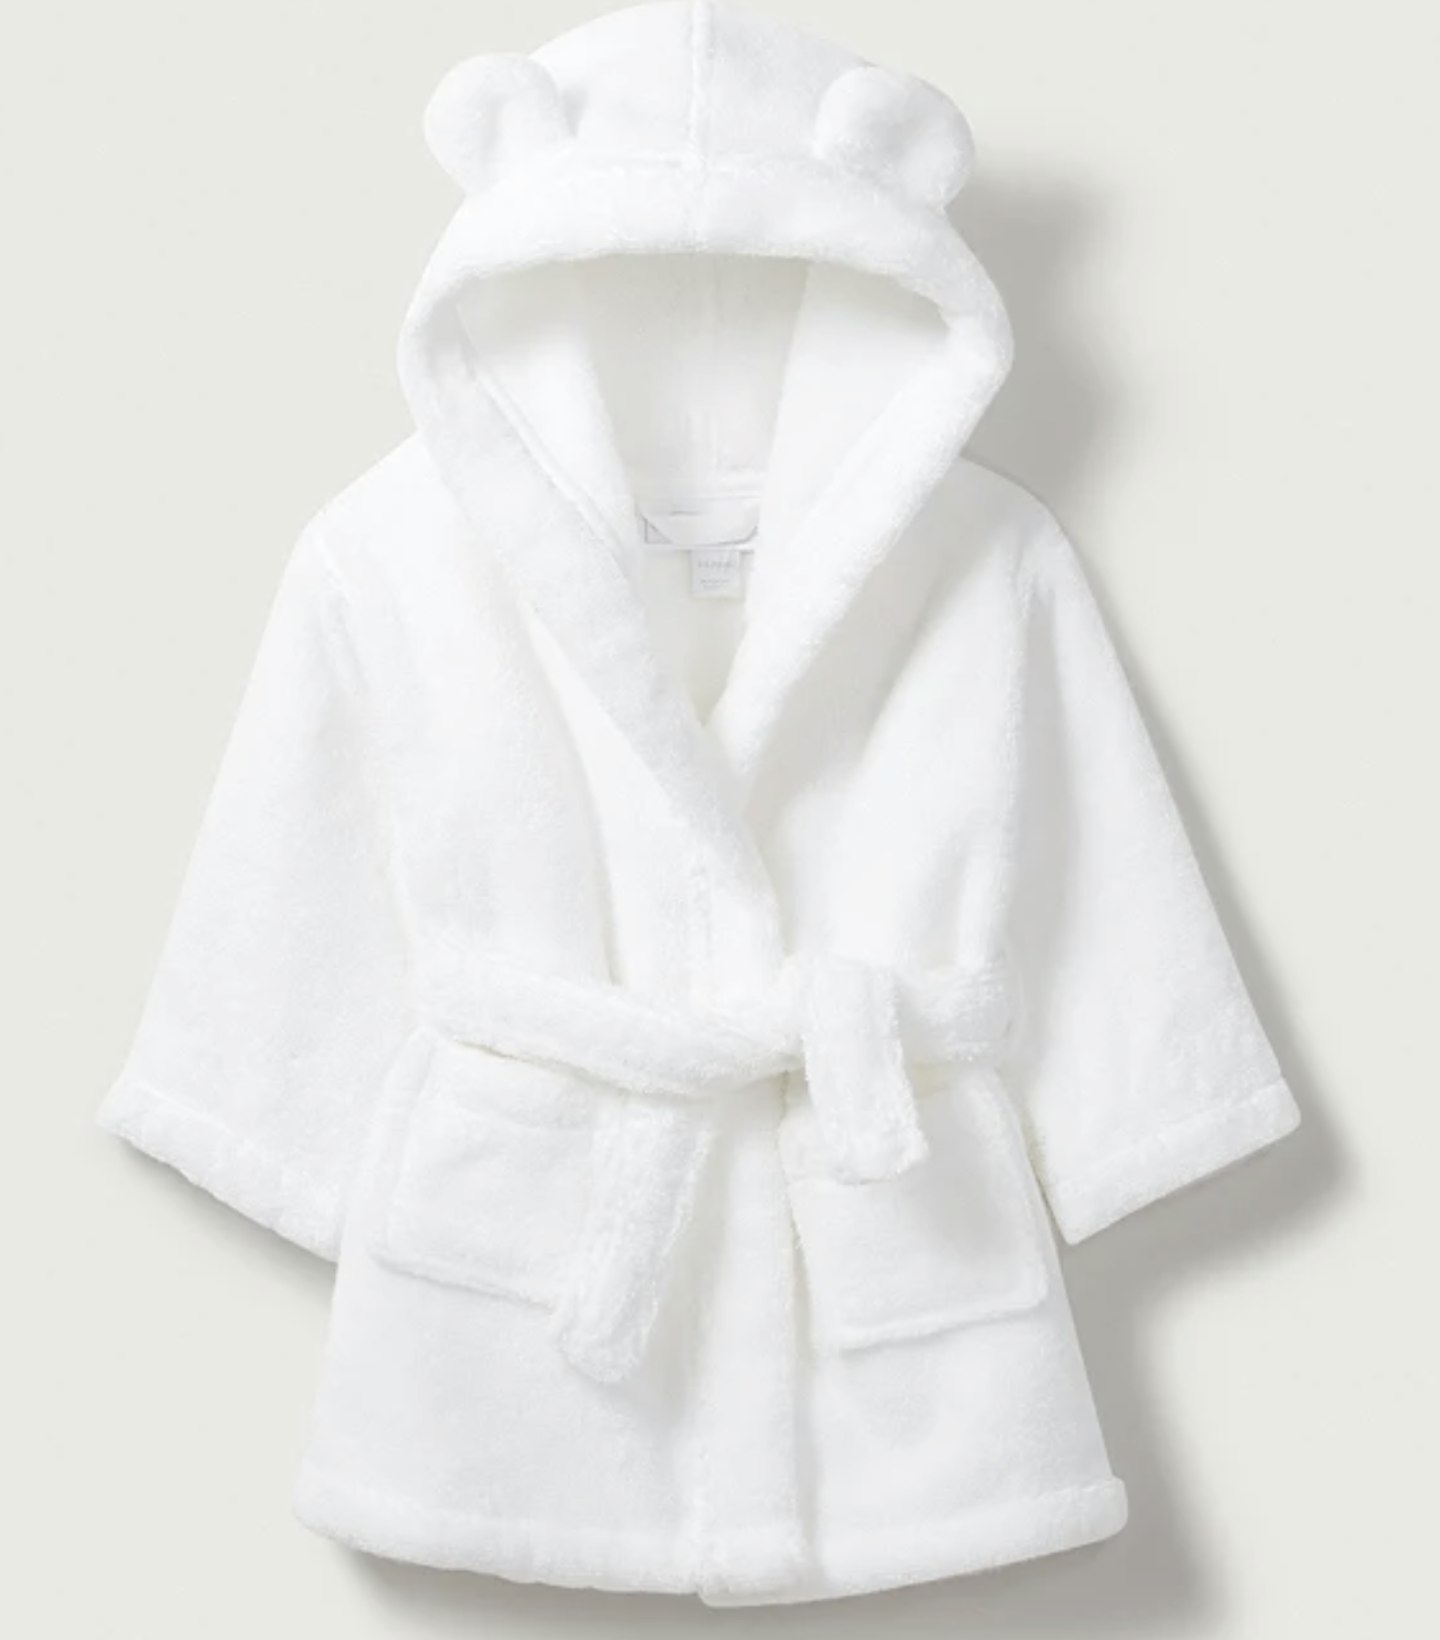 The White Company Hydrocotton Baby Robe - Baby shower gift